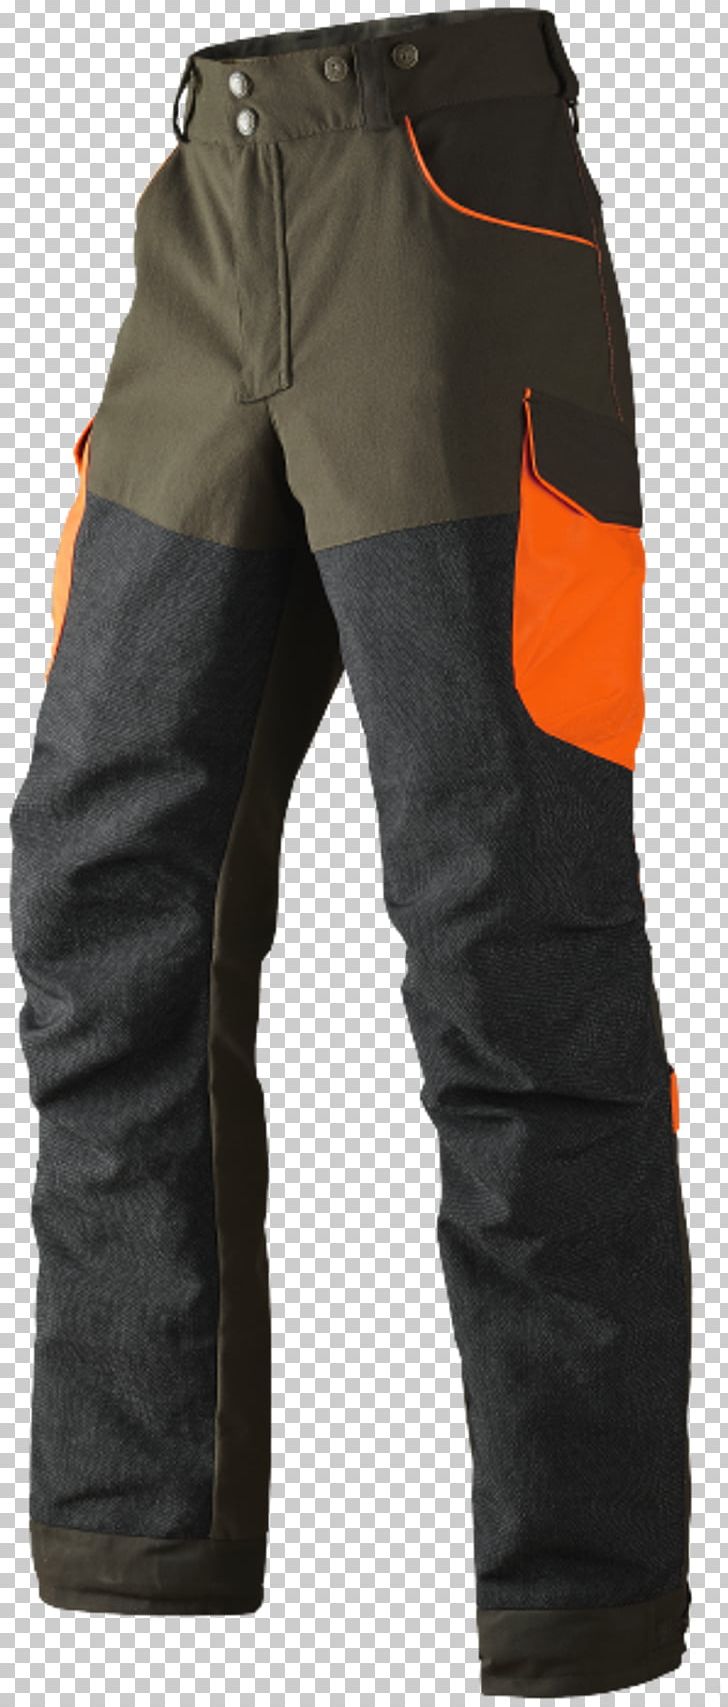 Wild Boar Boar Hunting Pants Clothing PNG, Clipart, Boar Hunting, Clothing, Denim, Fur, Goretex Free PNG Download